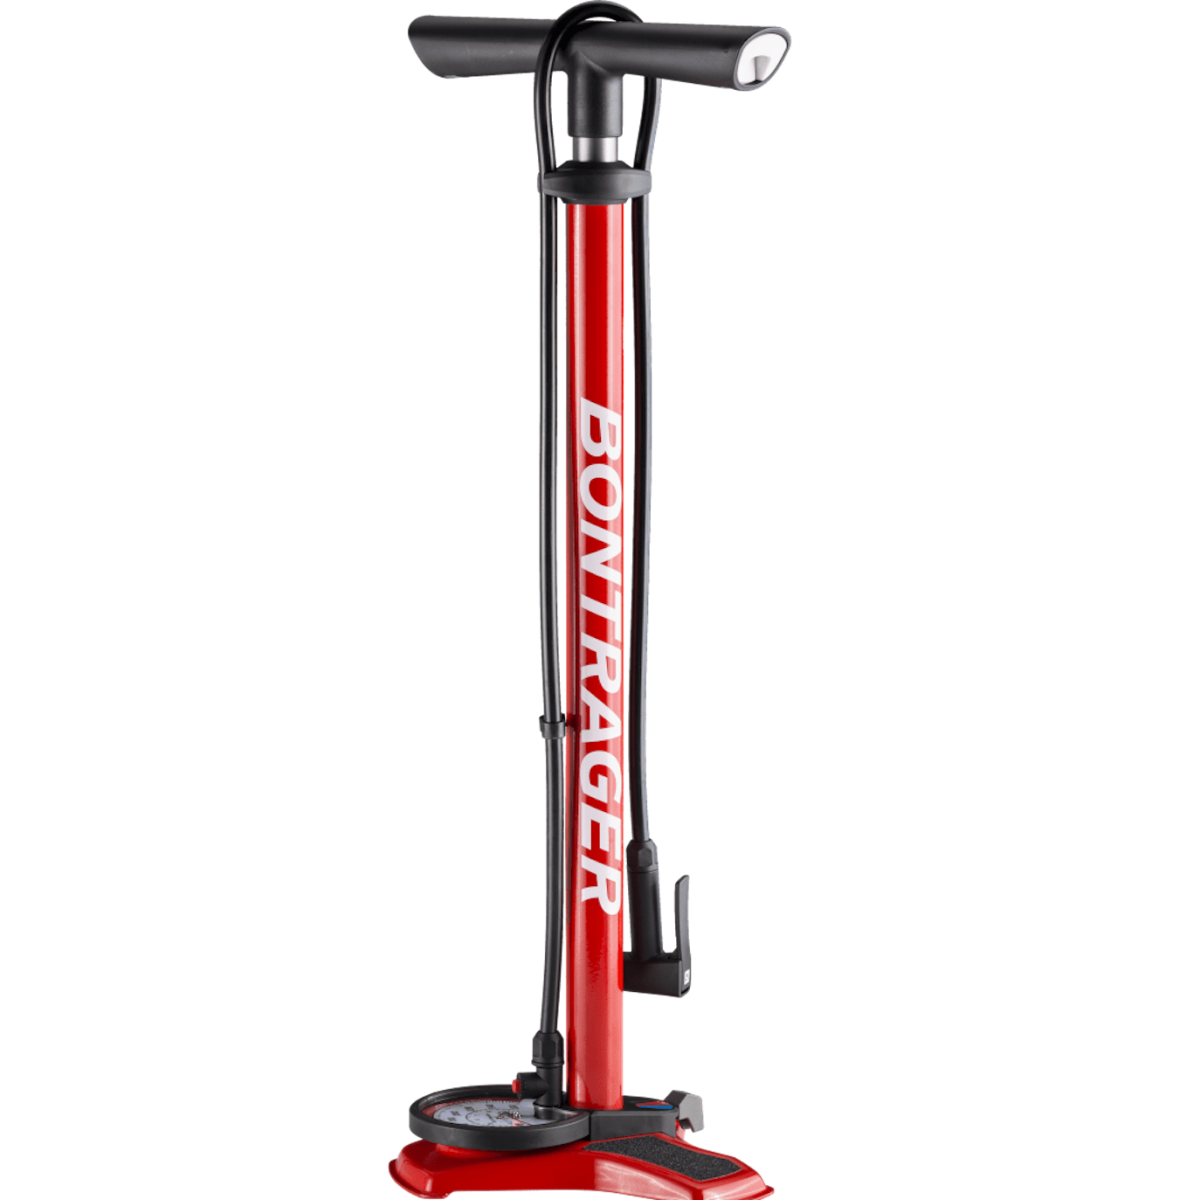 BONTRAGER DUAL CHARGER floor pump - red